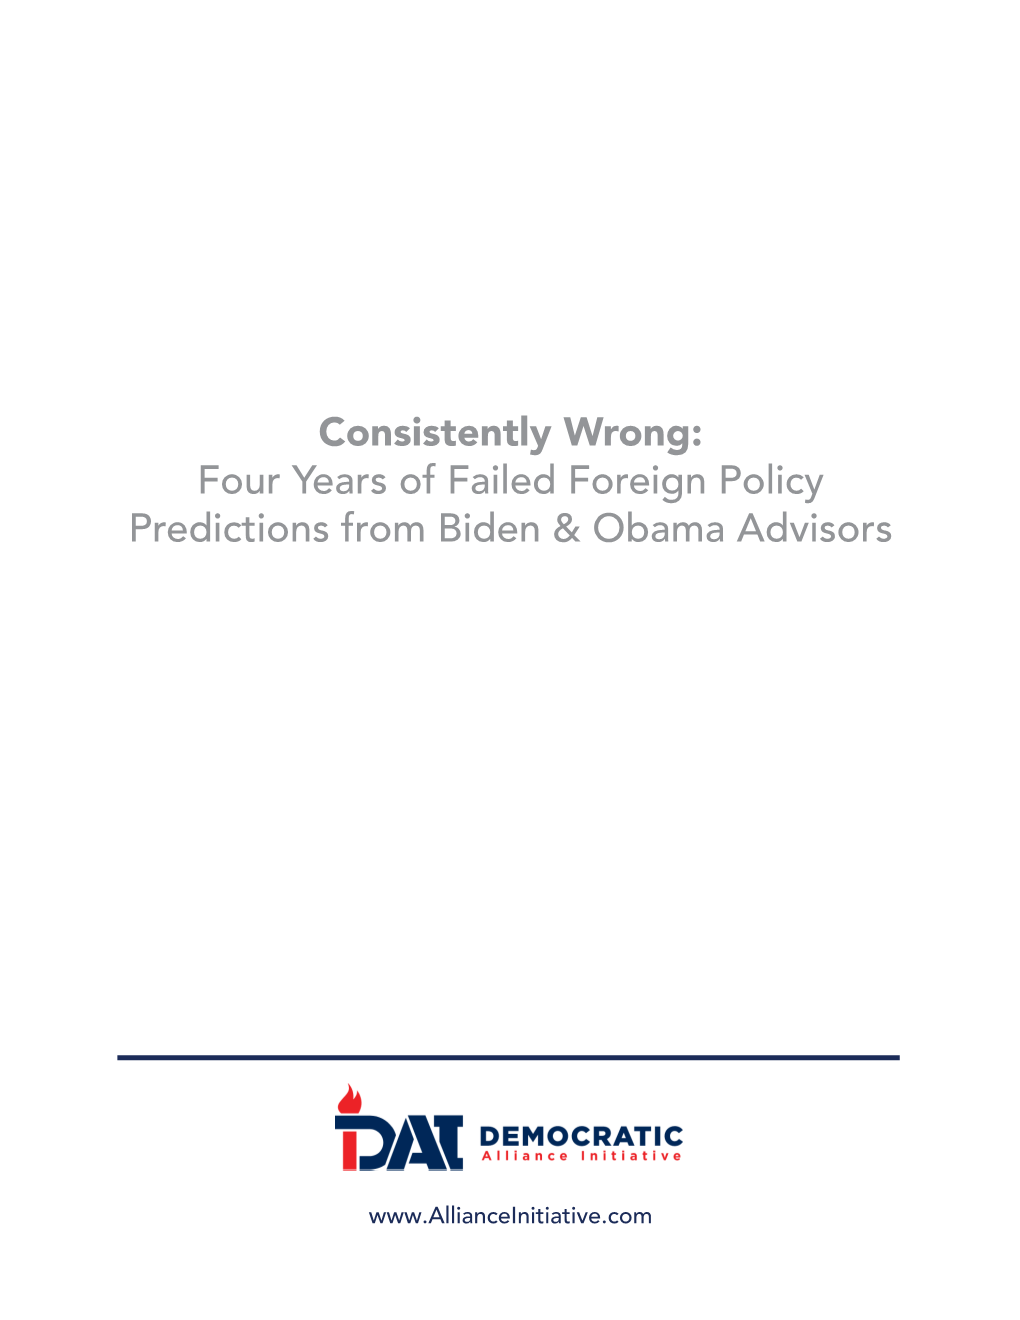 Consistently Wrong: Four Years of Failed Foreign Policy Predictions from Biden & Obama Advisors